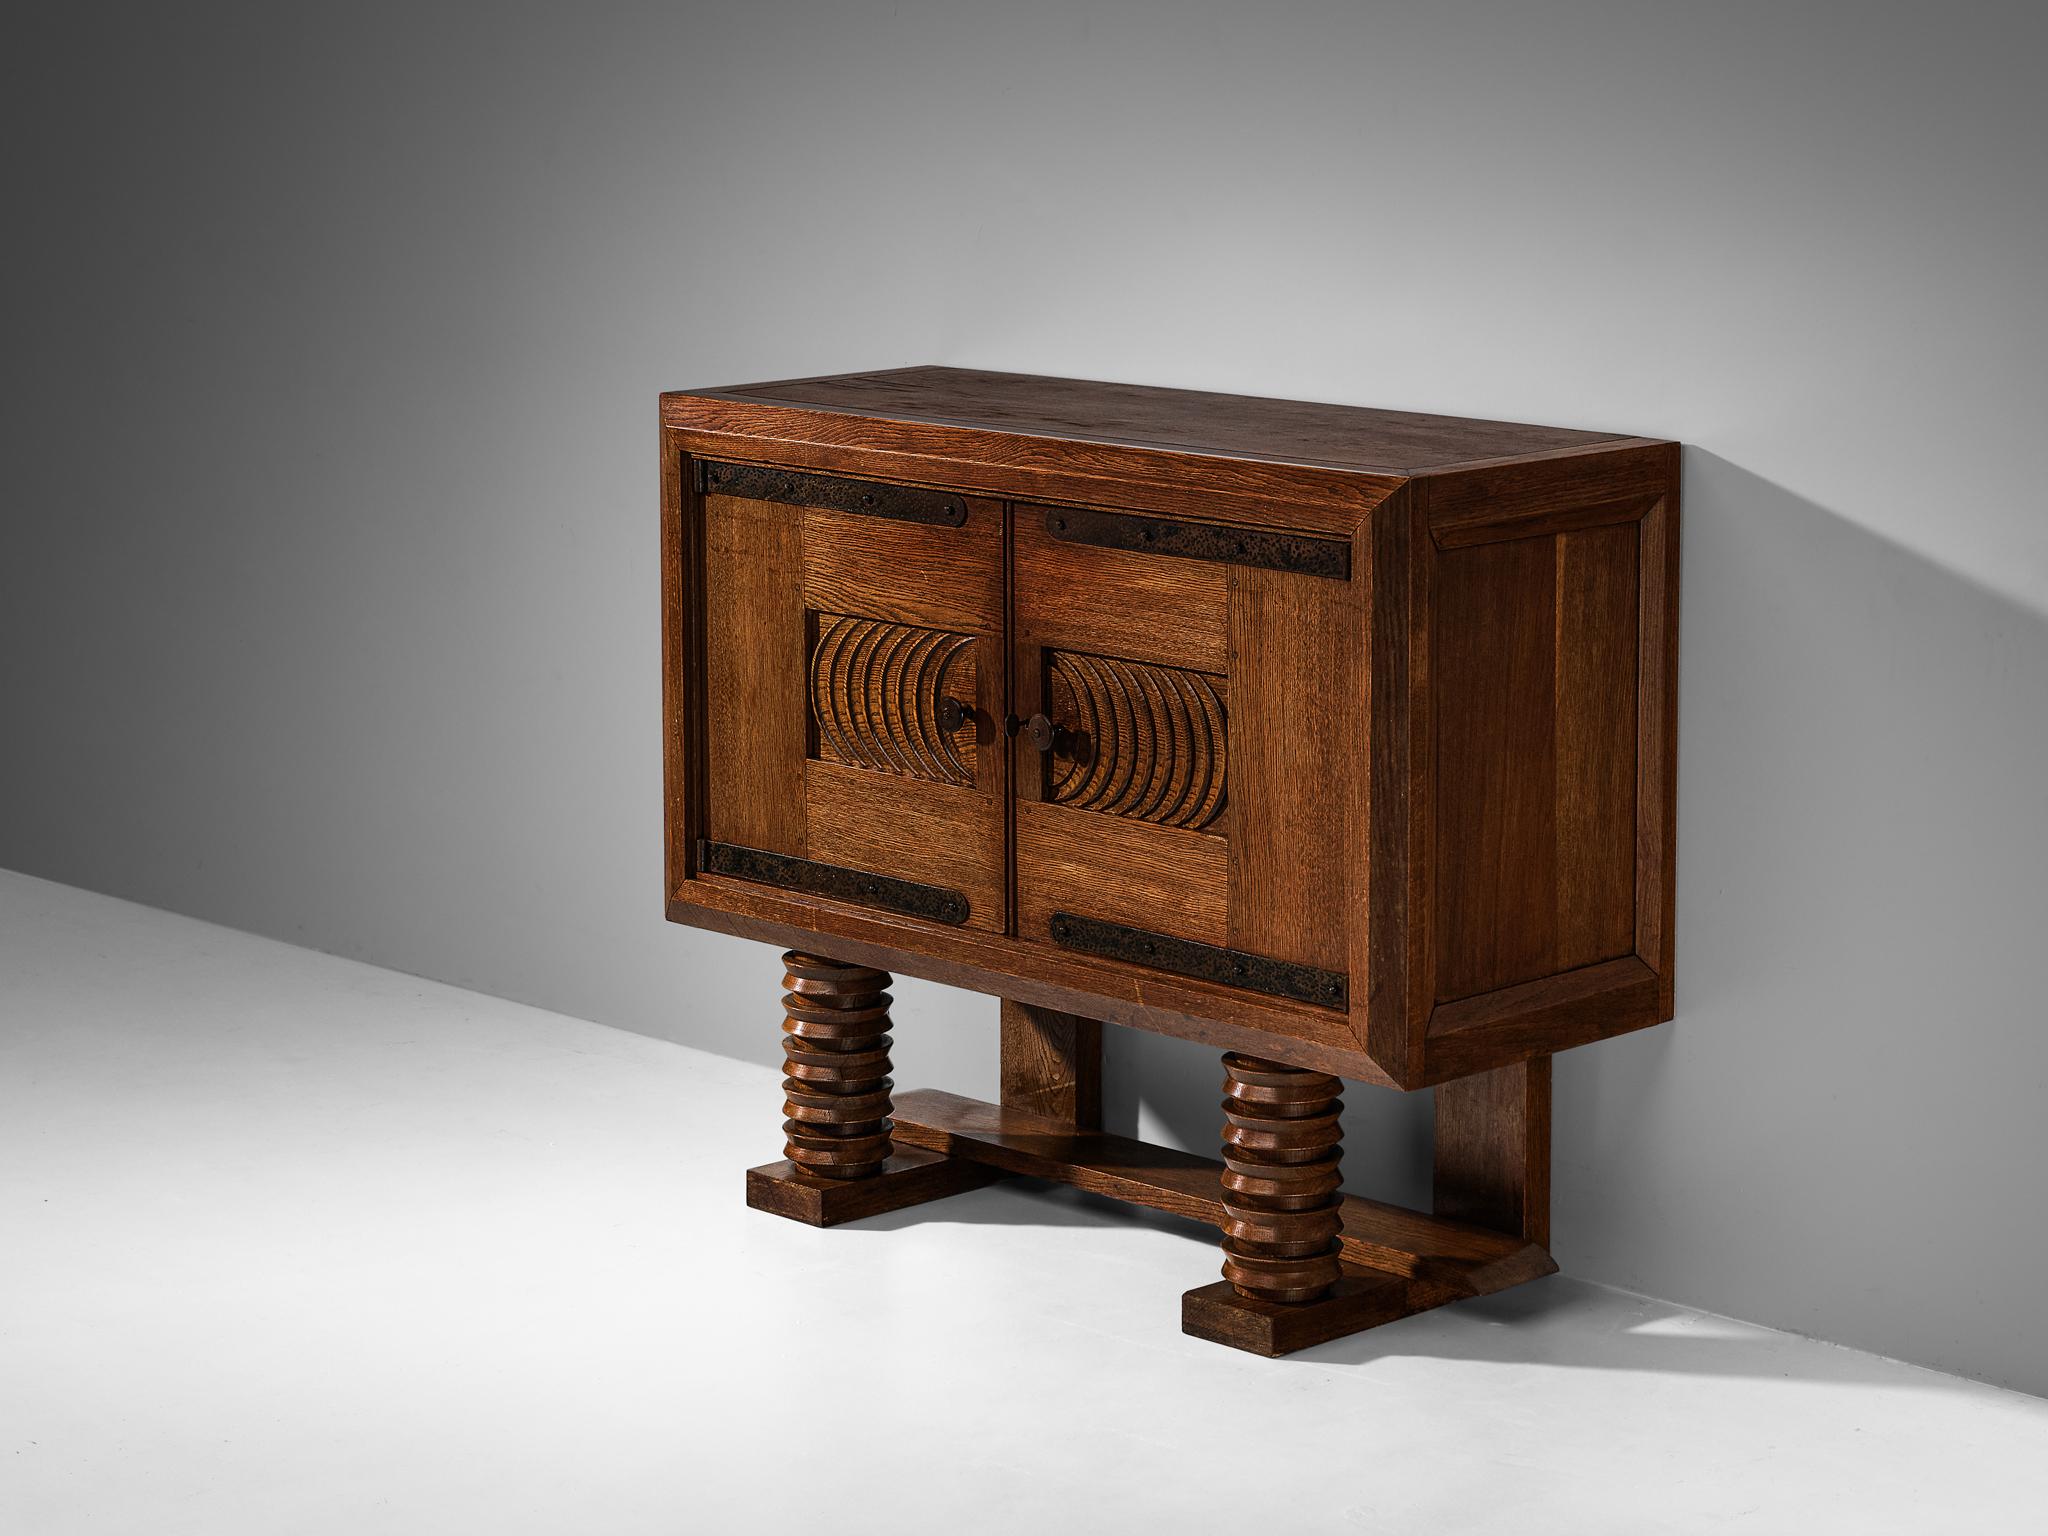 Georges & Gaston Guérin, cabinet, solid oak, iron, Paris, France, 1930s/40s

Made in Paris, this sideboard is designed according to the French Art Deco design principles that rose to prominence in the 1930s and 1940s. This credenza clearly shows